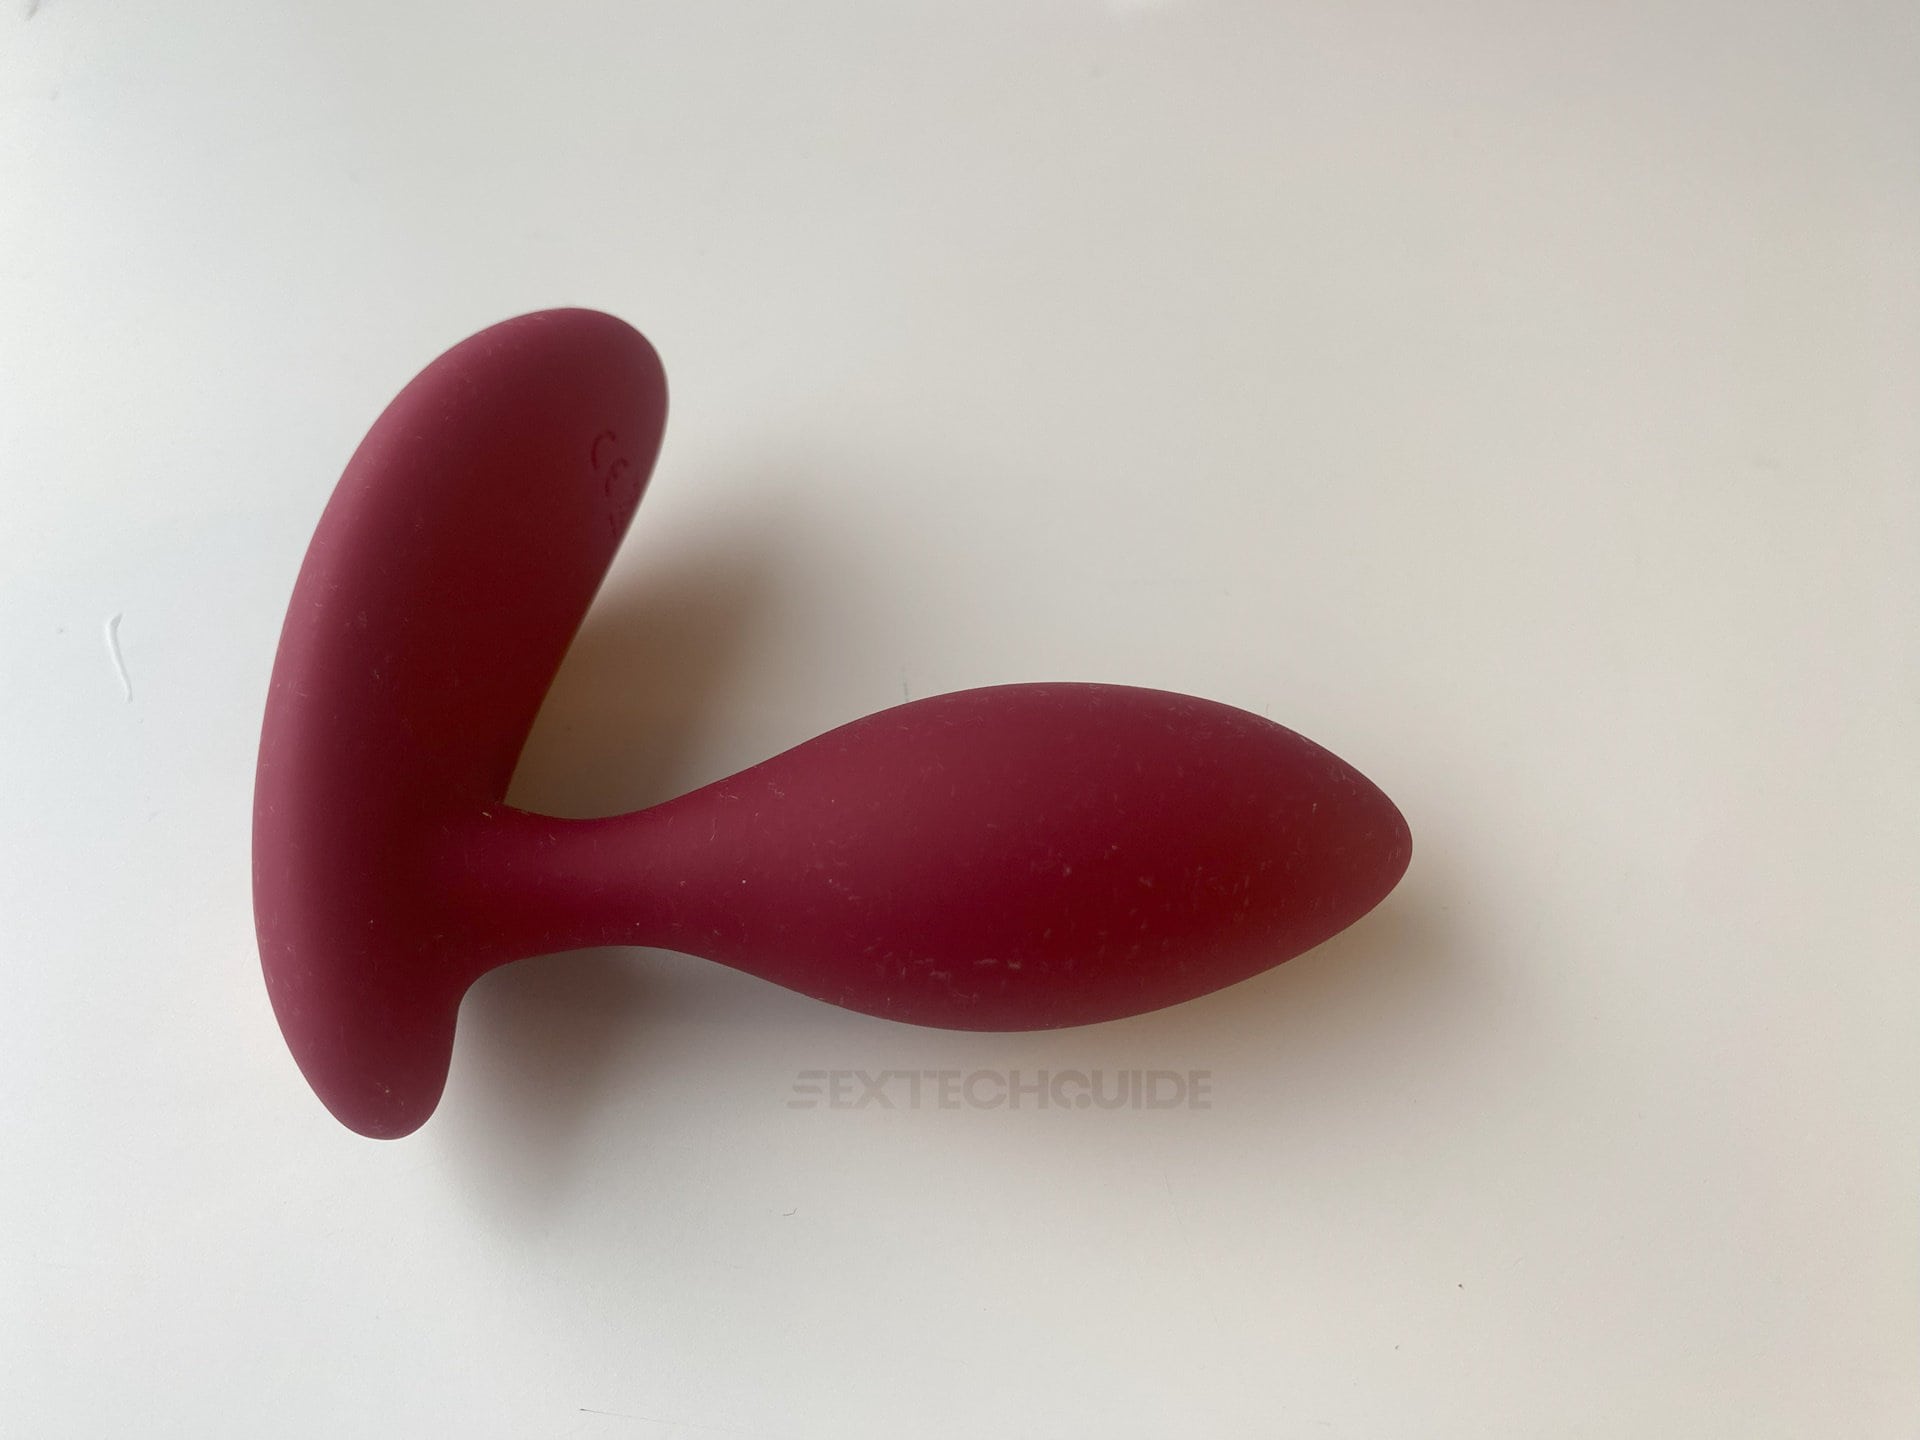 A red sex toy, specifically designed for anal pleasure, on a smooth white surface.